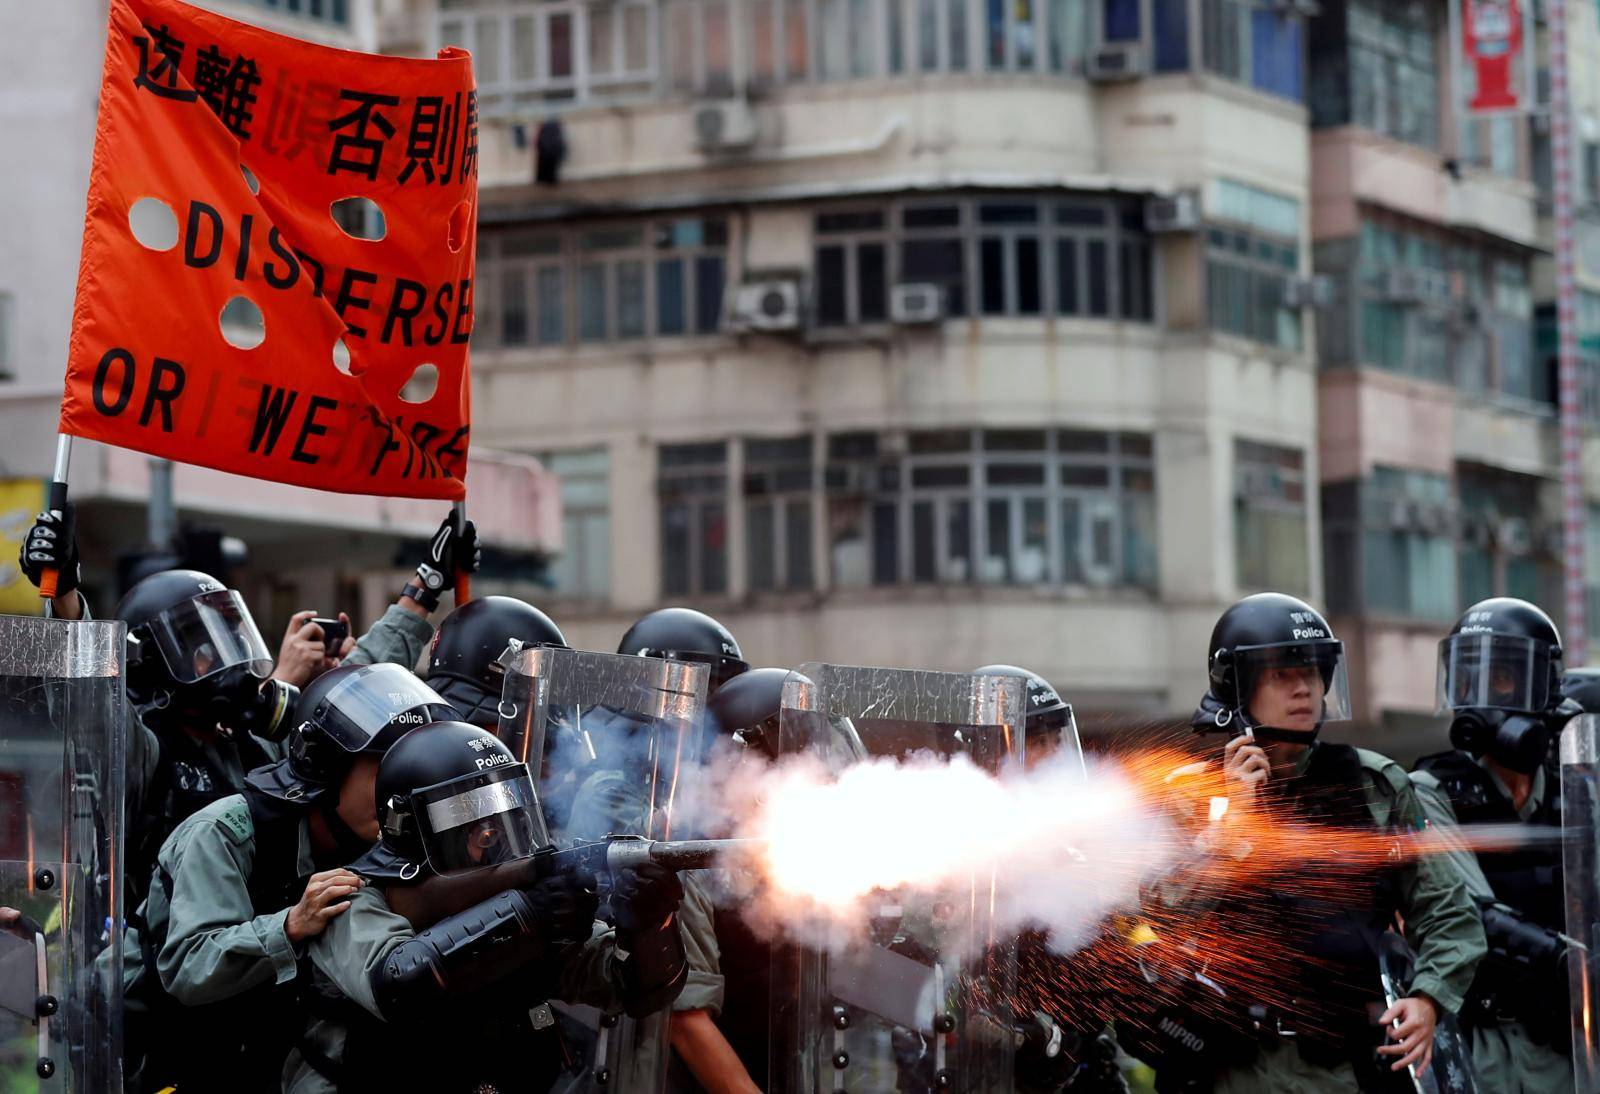 Police officers fire tear gas as anti-extradition bill protesters demonstrate in Sham Shui Po neighbourhood in Hong Kong,